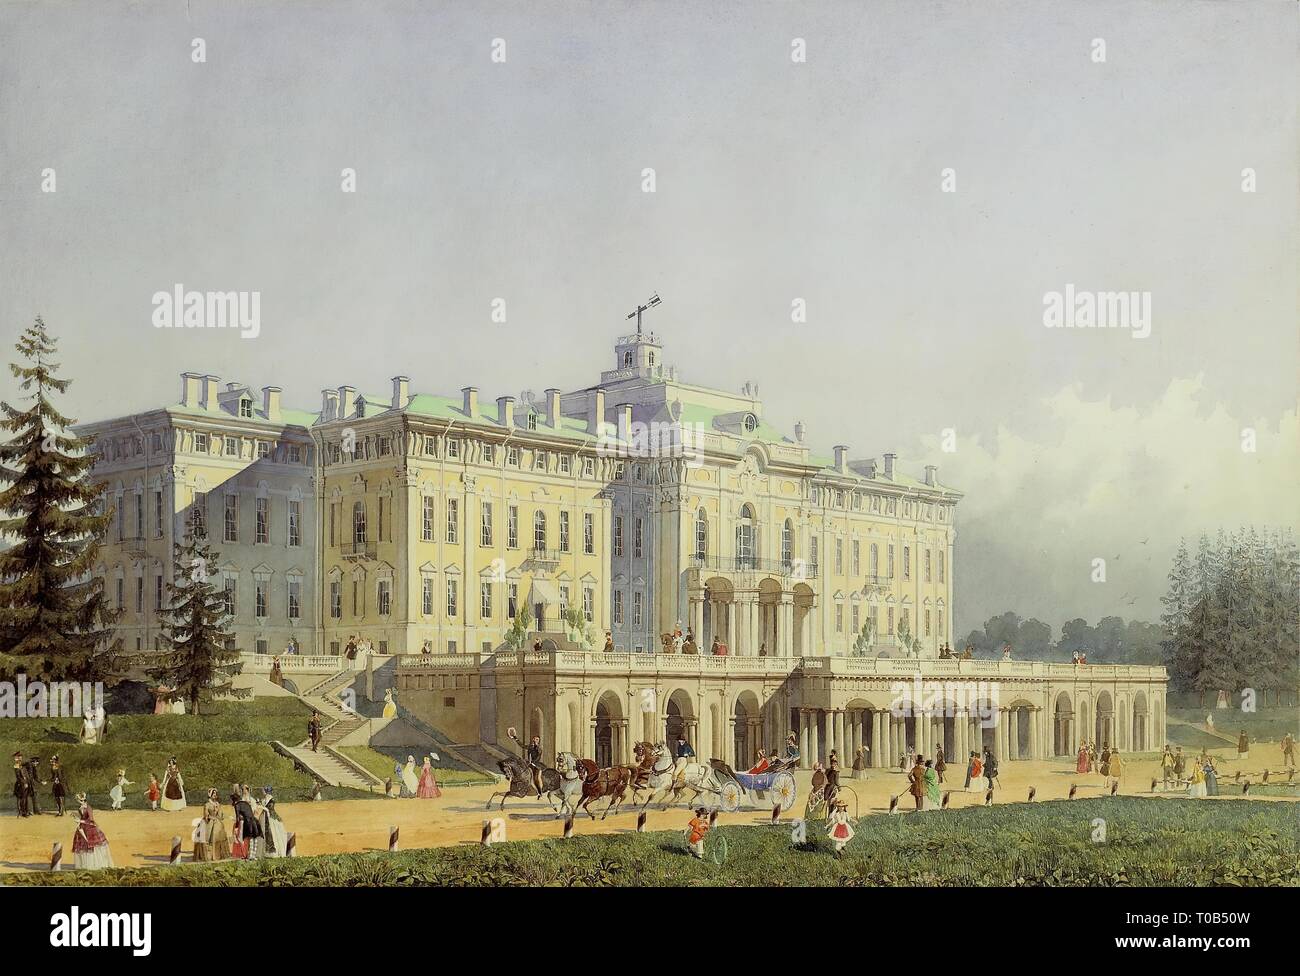 'Palace in Strelna'. Series 'Views of St Petersburg and Moscow', produce as a gift to Queen Victoria on the occasion of the 10th anniversary of her reign. Russia, 1847. Dimensions: 25,7x38 cm. Museum: State Hermitage, St. Petersburg. Author: Alexey Gornostayev . Alexei Maximovich Gornostayev. Stock Photo